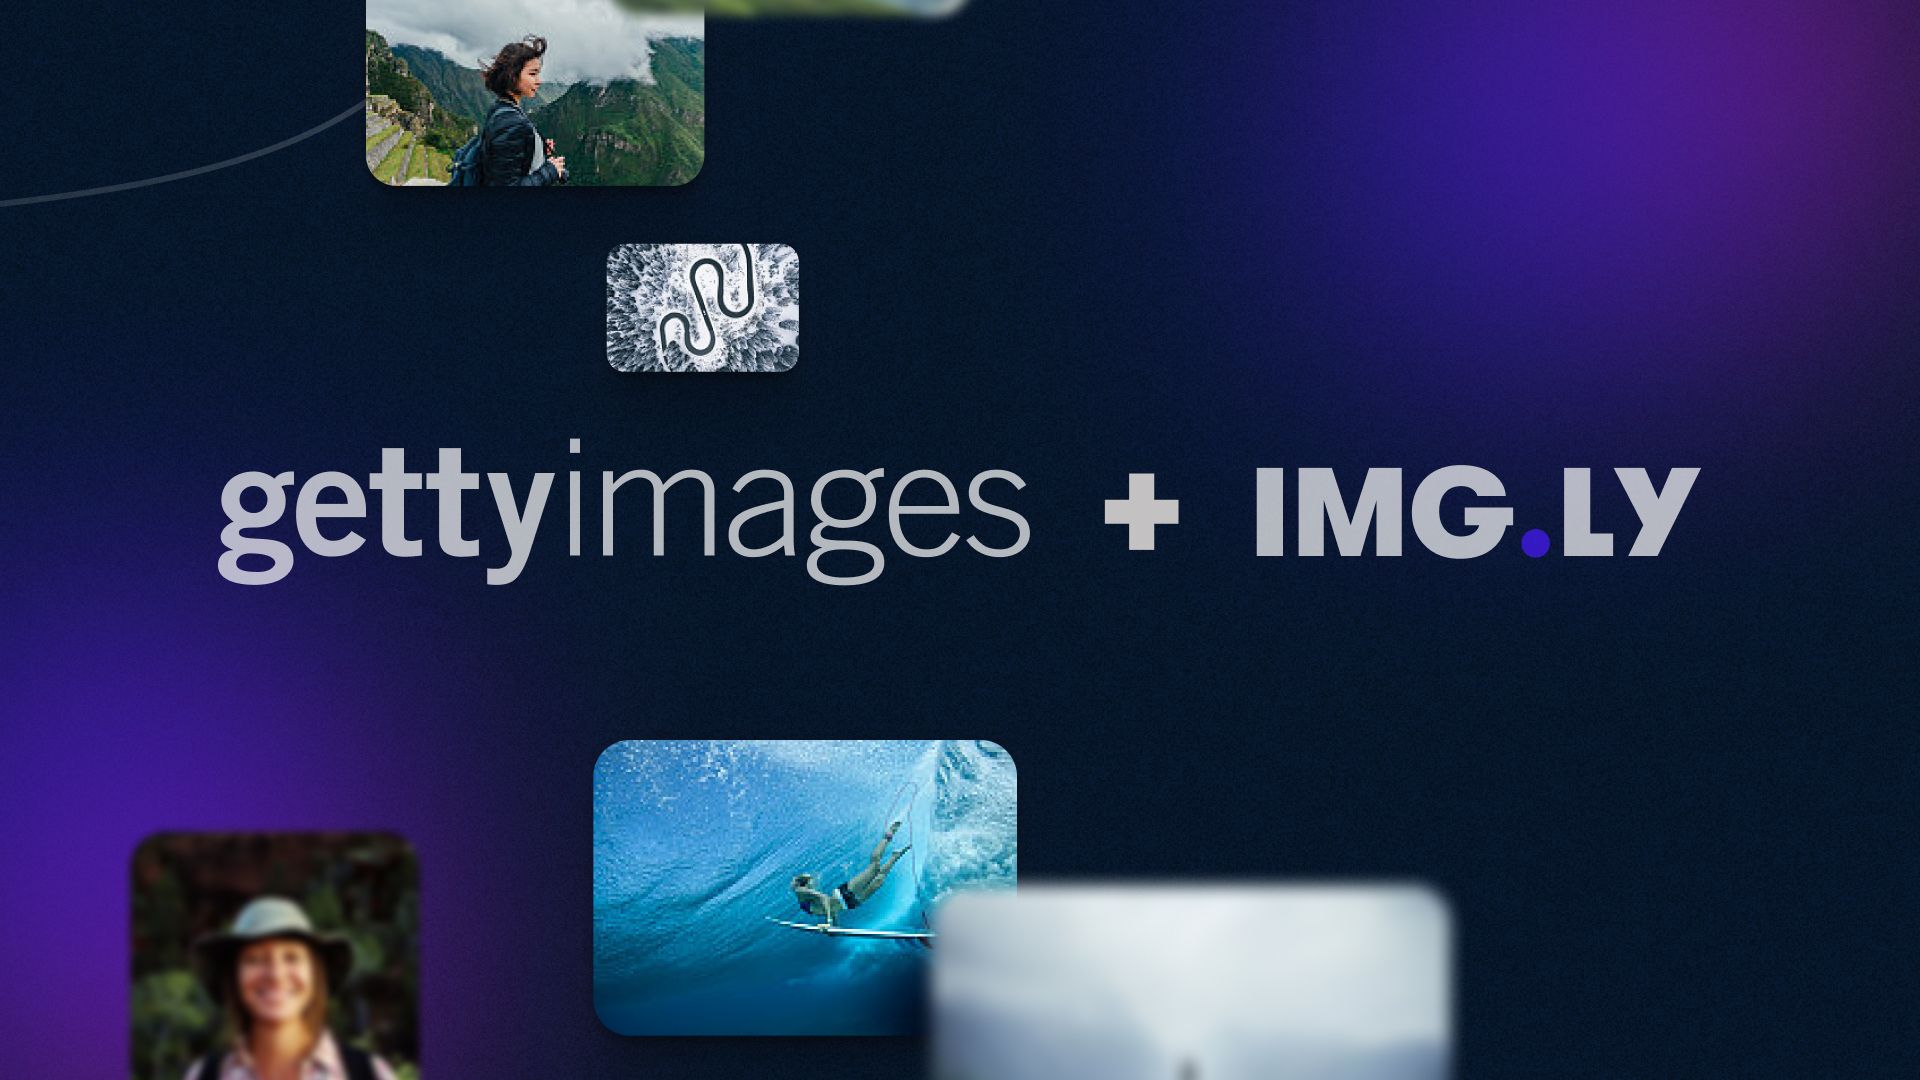 IMG.LY Partners with Getty Images to Revolutionize Image Integration